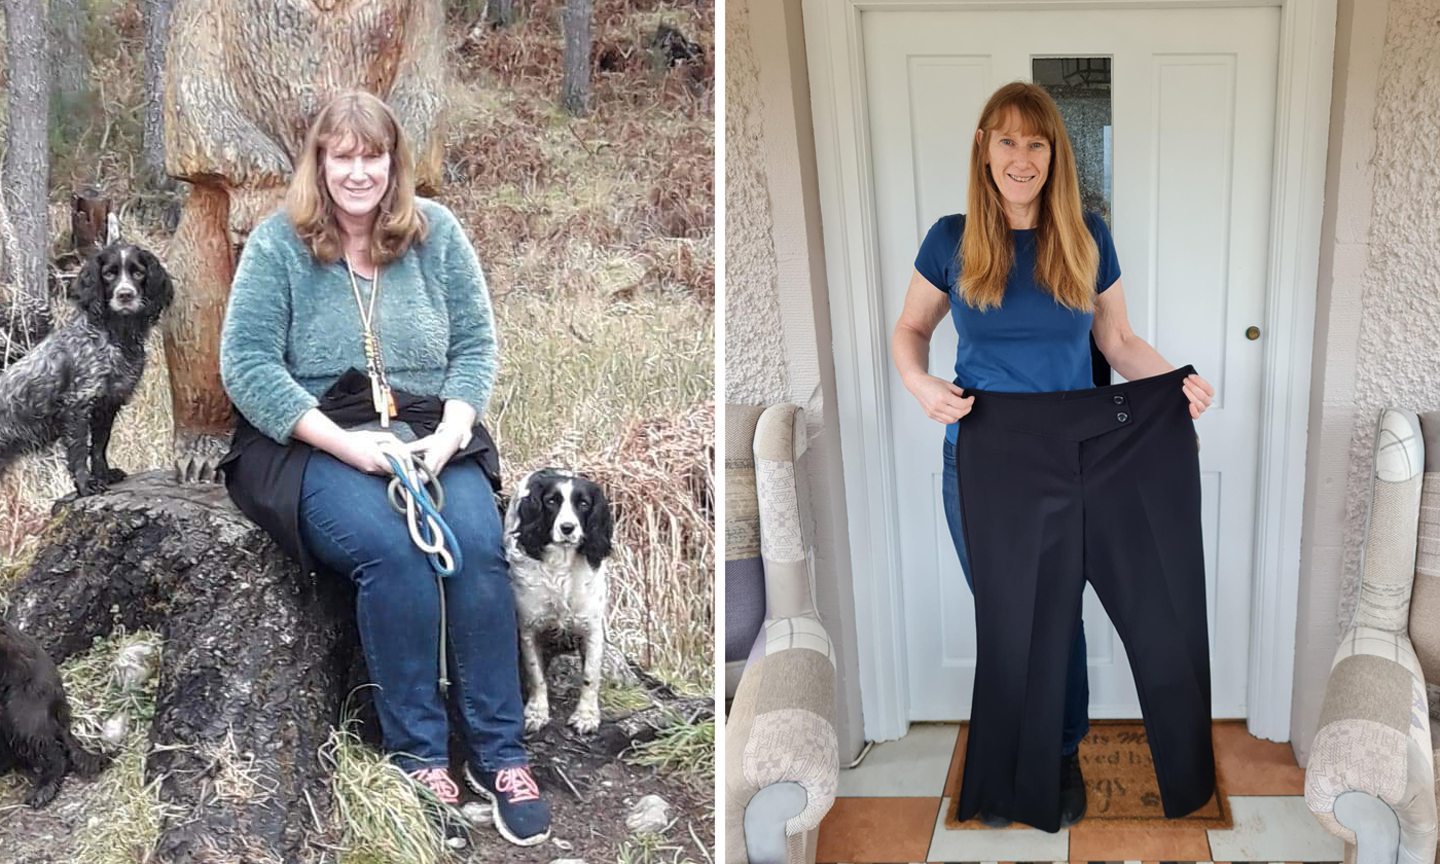 Jacqui Low before and after her remarkable weight loss.